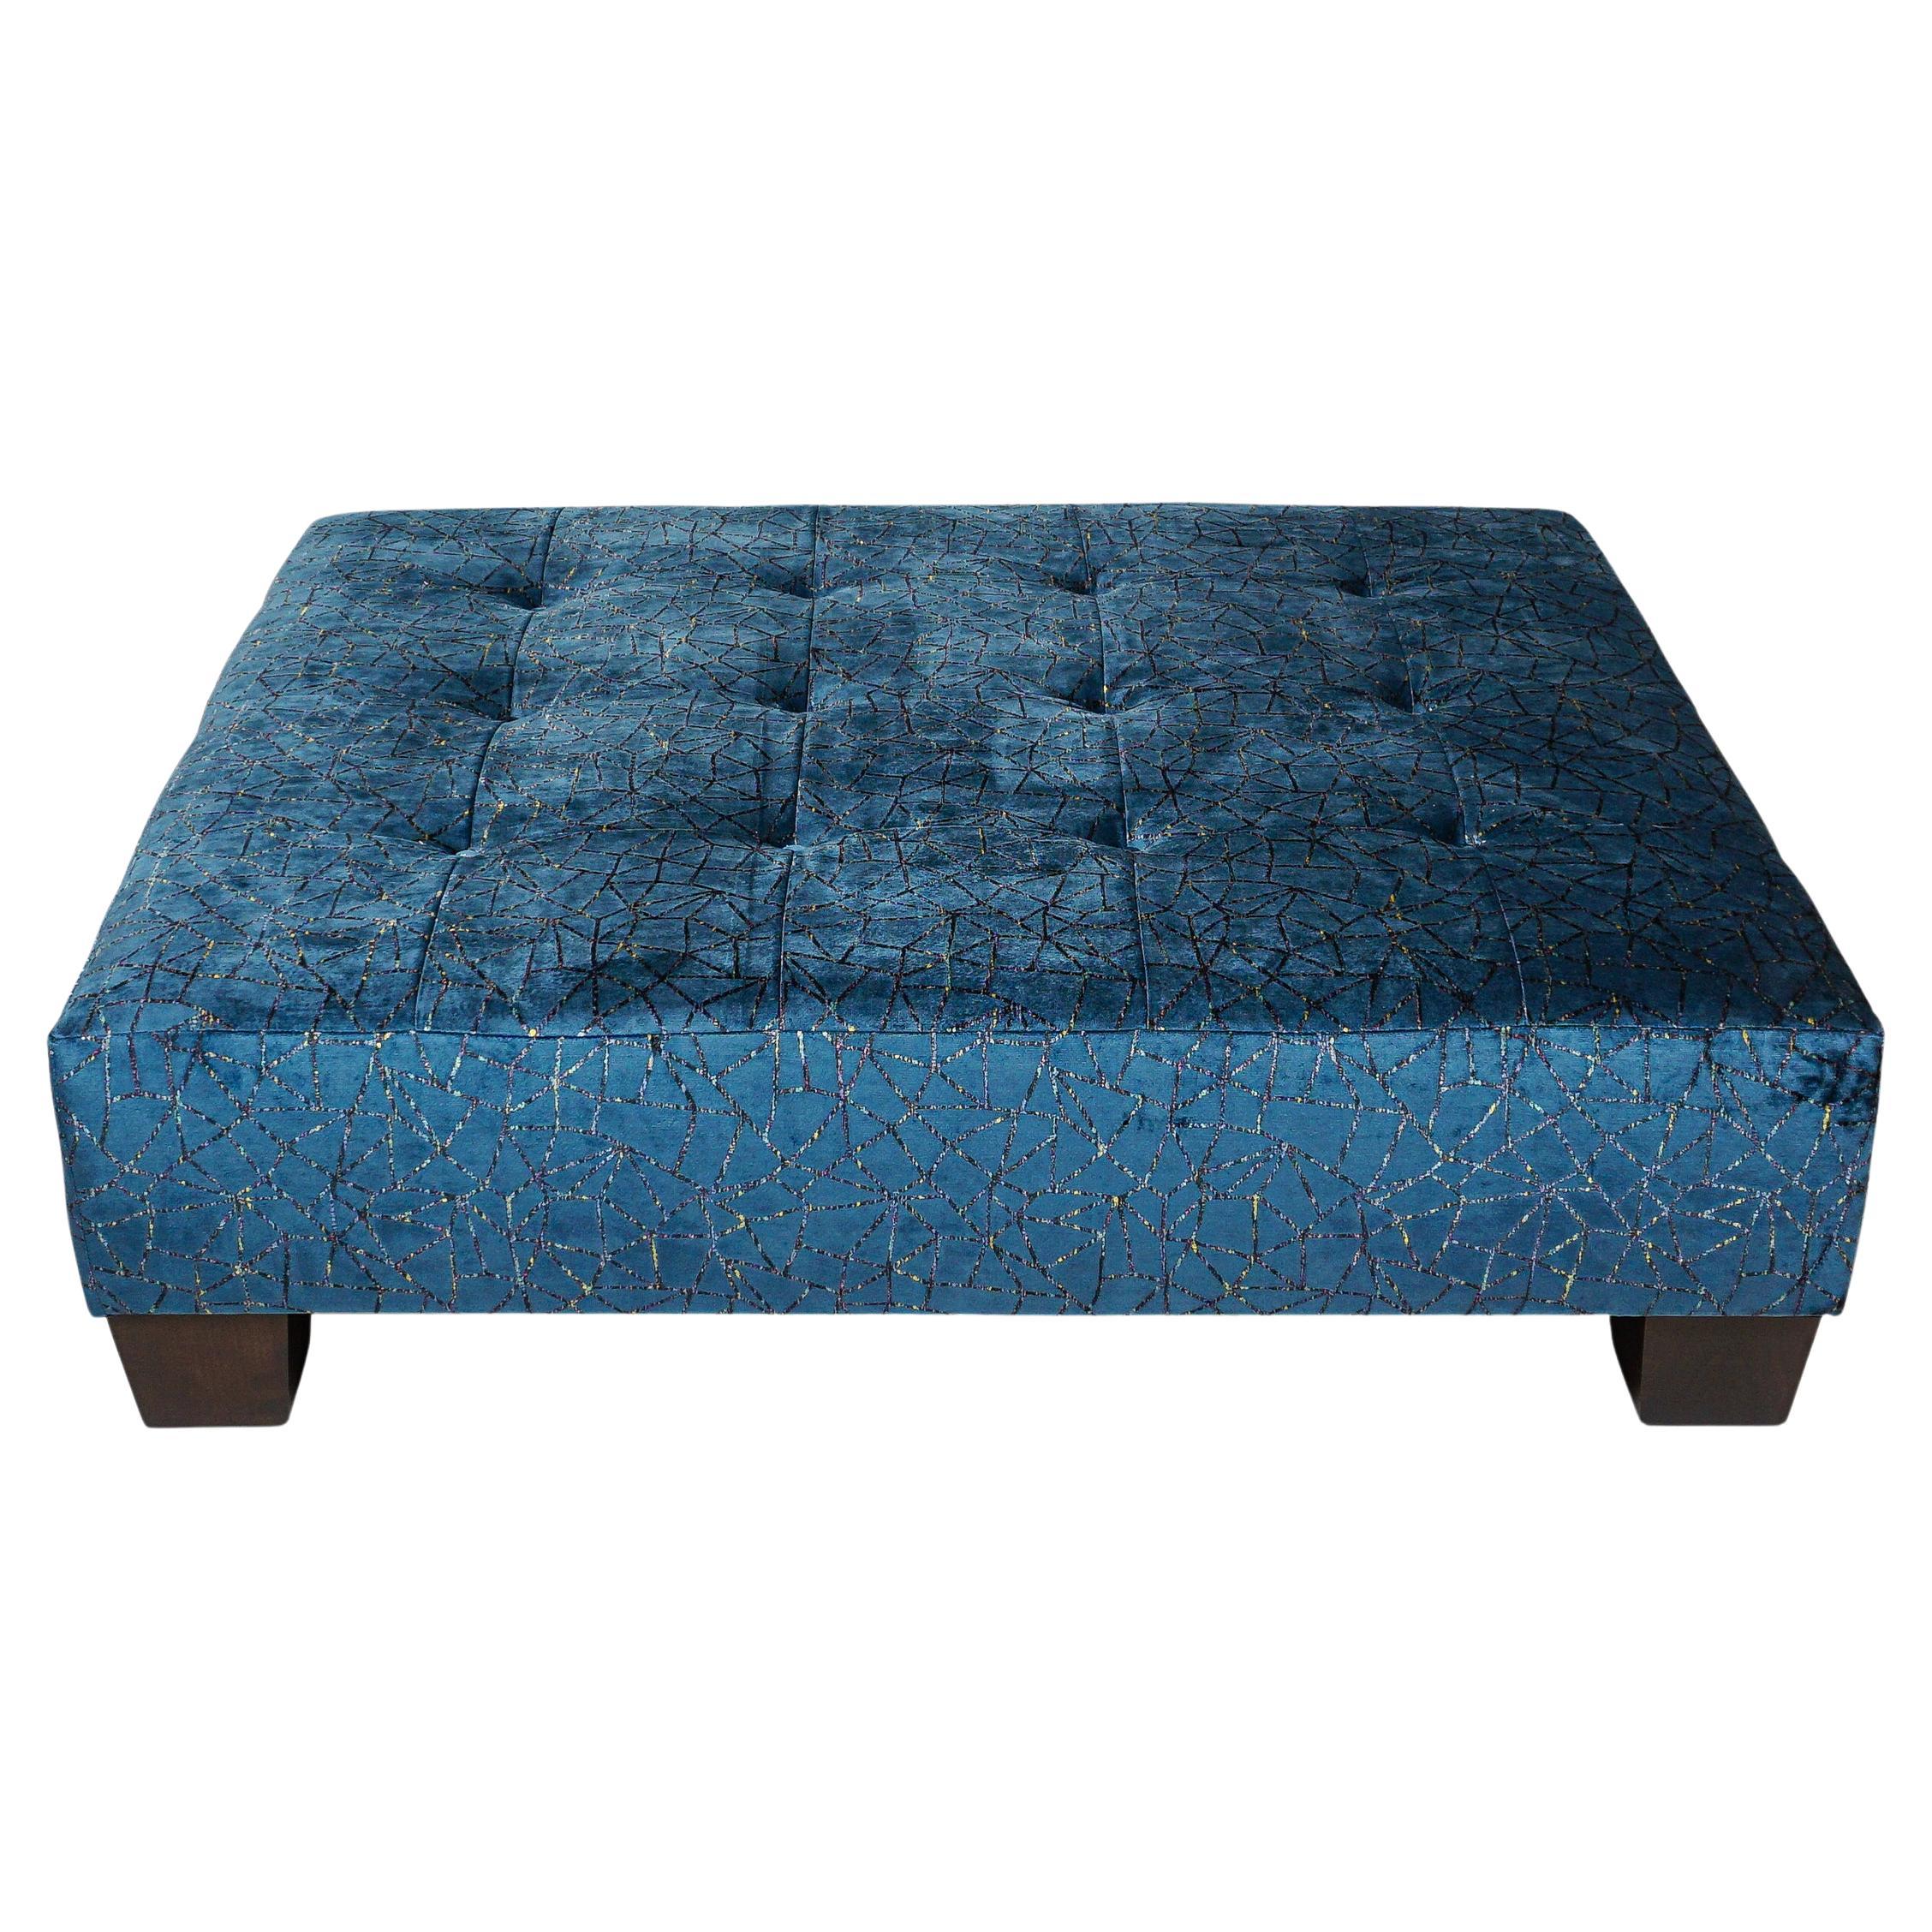 Transitional Square Button Tufted Upholstered Ottoman w/ Wood Feet Customizable